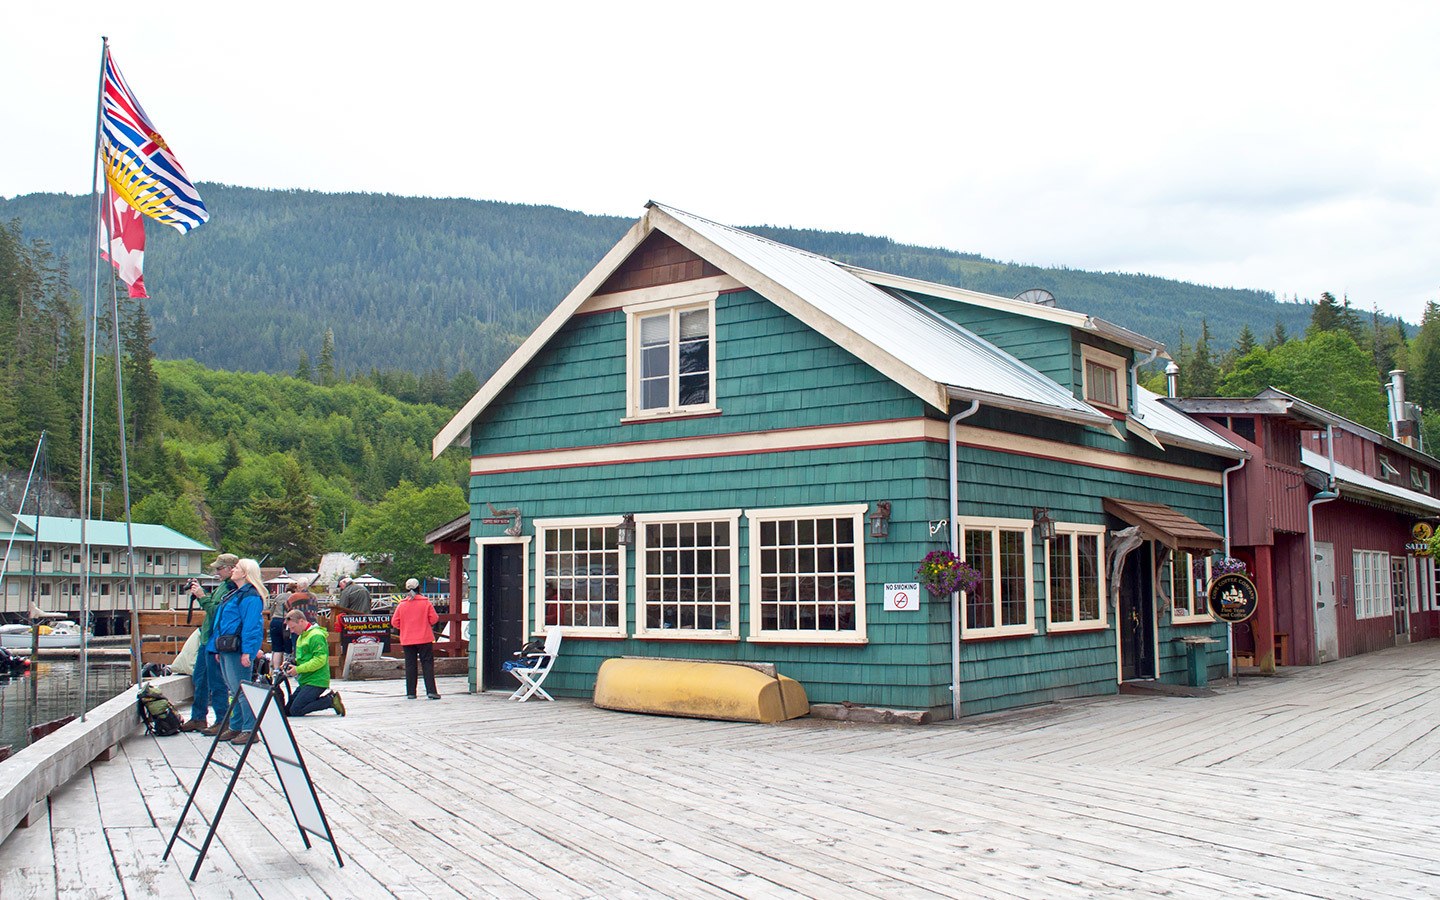 Wooden buildings and boardwalks at Telegraph Cove